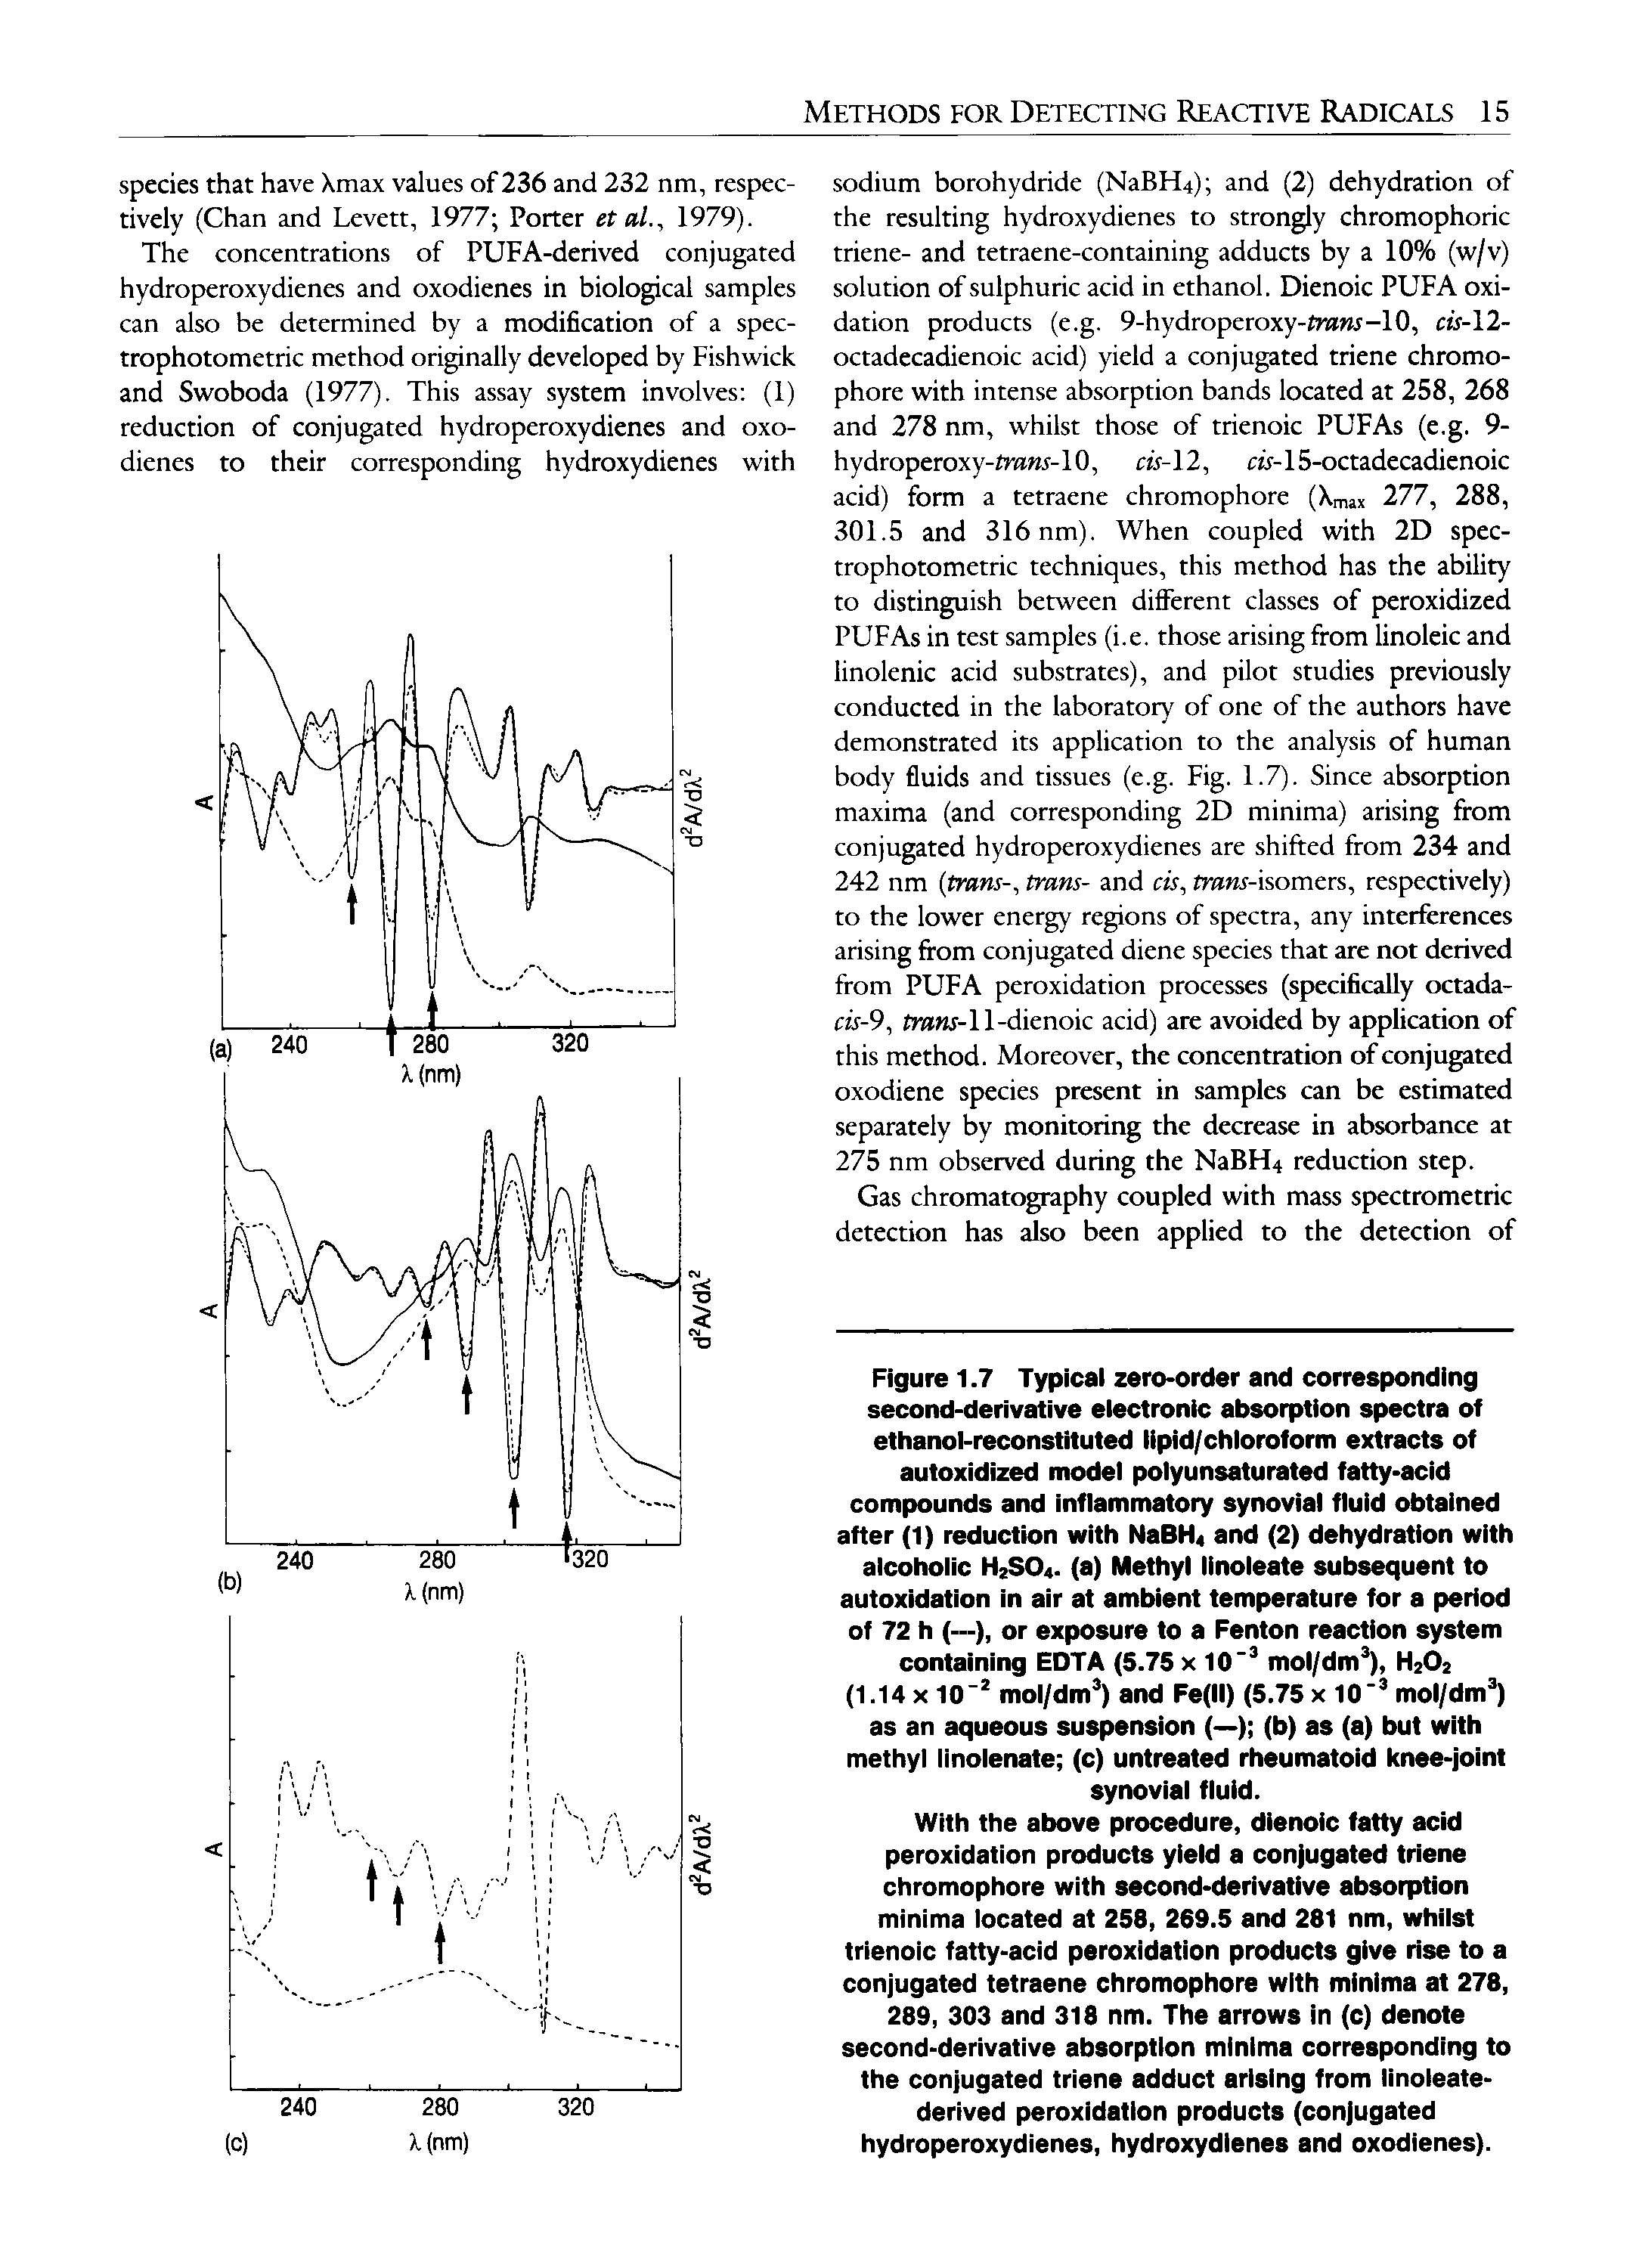 Figure 1.7 Typical zero-order and corresponding second-derivative electronic absorption spectra of ethanol-reconstituted lipid/chloroform extracts of autoxidized model polyunsaturated fatty-acid compounds and inflammatory synovial fluid obtained after (1) reduction with NaBH4 and (2) dehydration with alcoholic H2S04- (a) Methyl linoleate subsequent to autoxidation in air at ambient temperature for a period of 72 h (—), or exposure to a Fenton reaction system containing EDTA (5.75 x 10 mol/dm ), H2O2 (1.14 X 10 mol/dm ) and Fe(ll) (5.75 x IO mol/dm ) as an aqueous suspension (—) (b) as (a) but with methyl linolenate (c) untreated rheumatoid knee-joint synovial fluid.